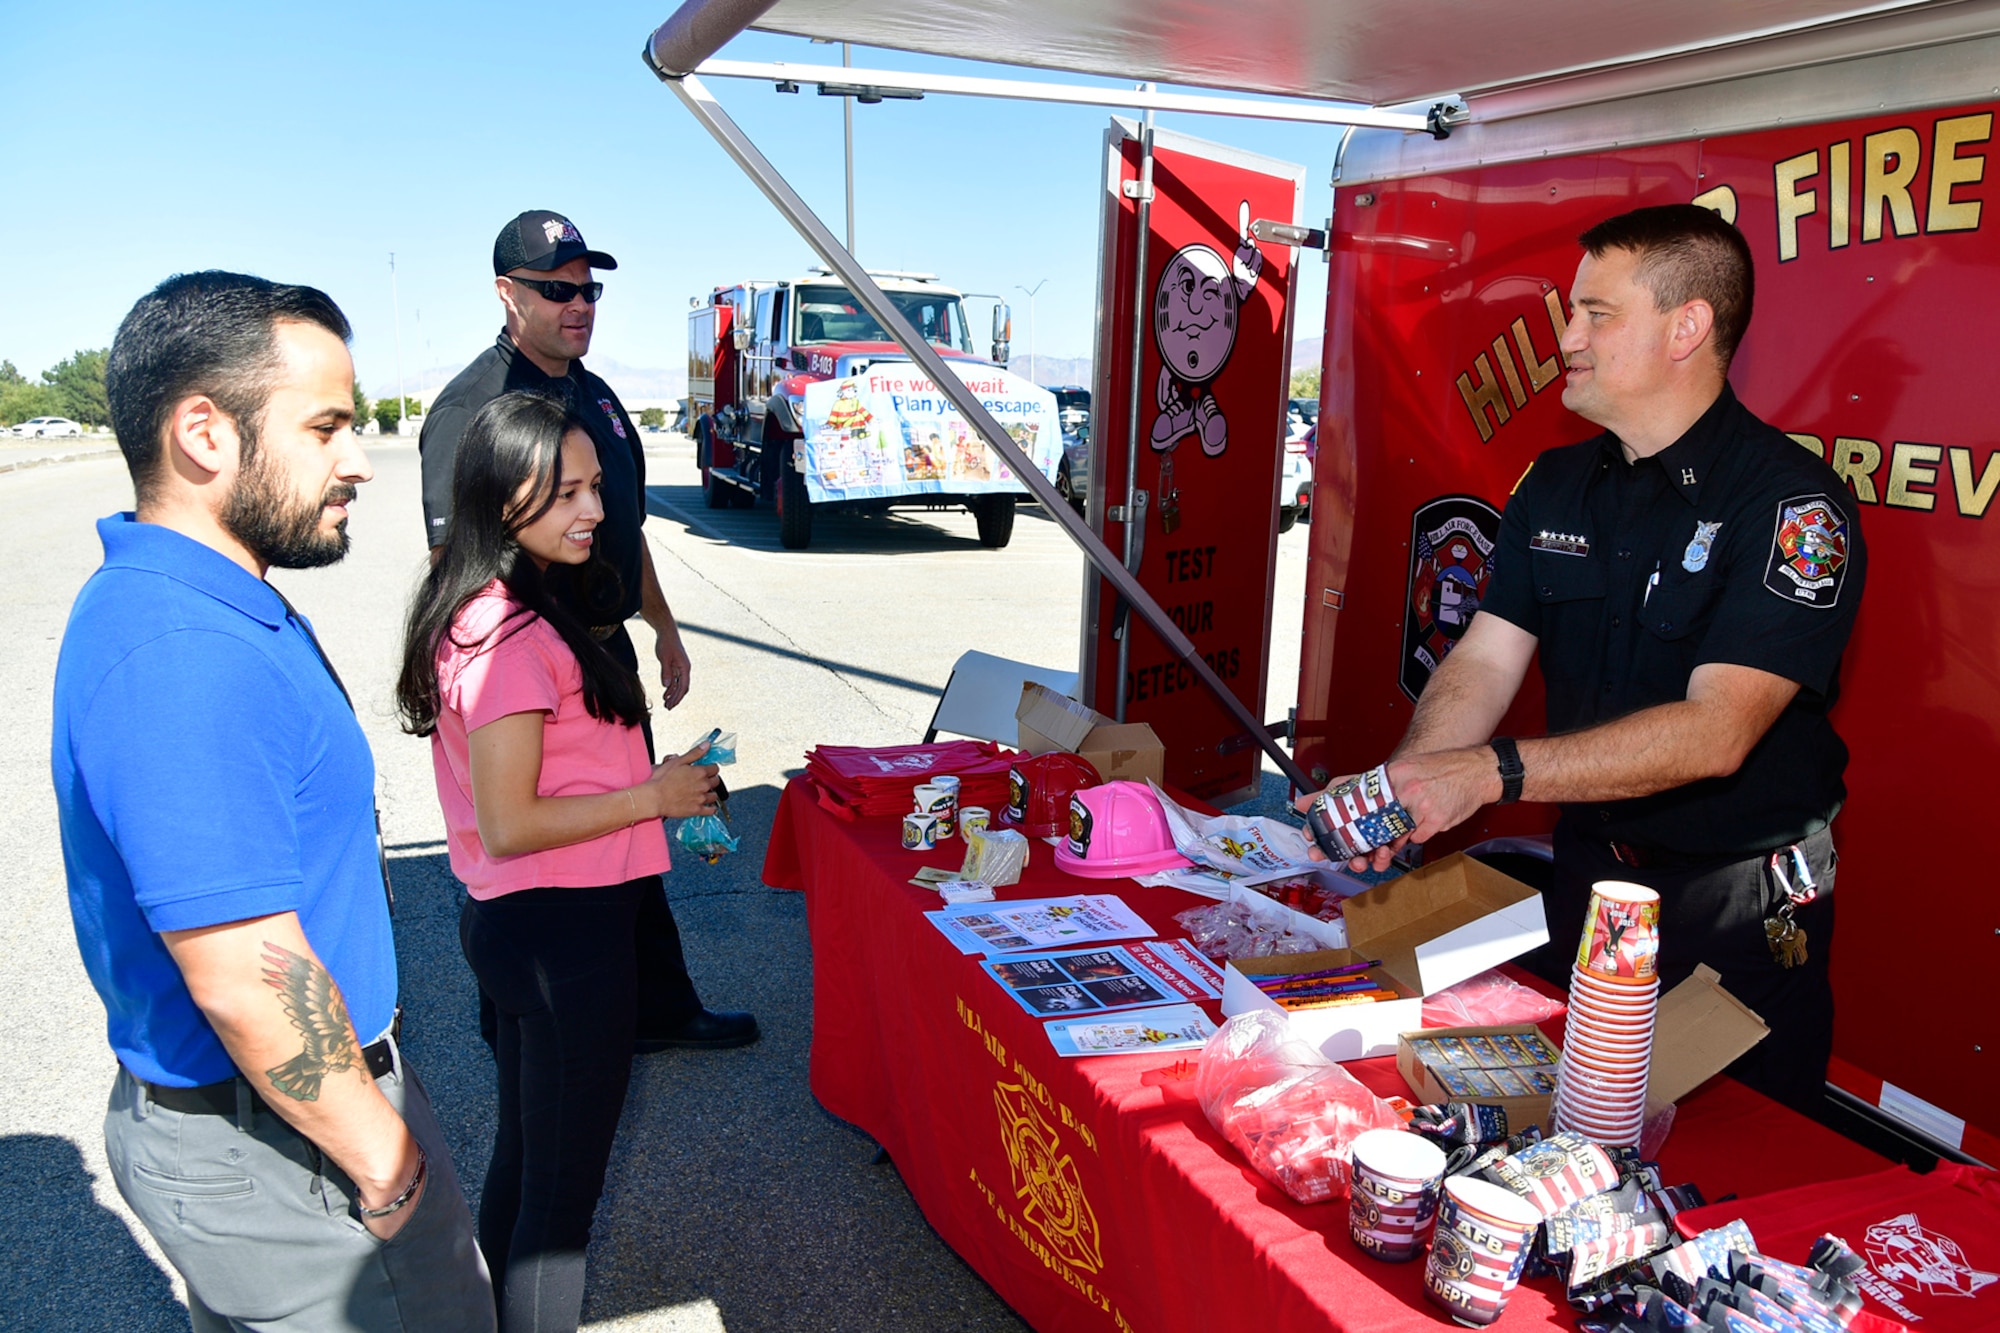 (At left) Chris Espinoza, F-16 System Program Office, and his wife Lora visit with Bryan Griffiths, 775th Civil Engineer Squadron fire Inspector, at a display booth in the Exchange parking lot Oct. 13, 2022, at Hill Air Force Base, Utah. In celebration of Fire Prevention Week, Hill Fire and Emergency Services held outreach events during the week to educate and raise awareness about fire dangers and prevention. (U.S. Air Force photo by Todd Cromar)